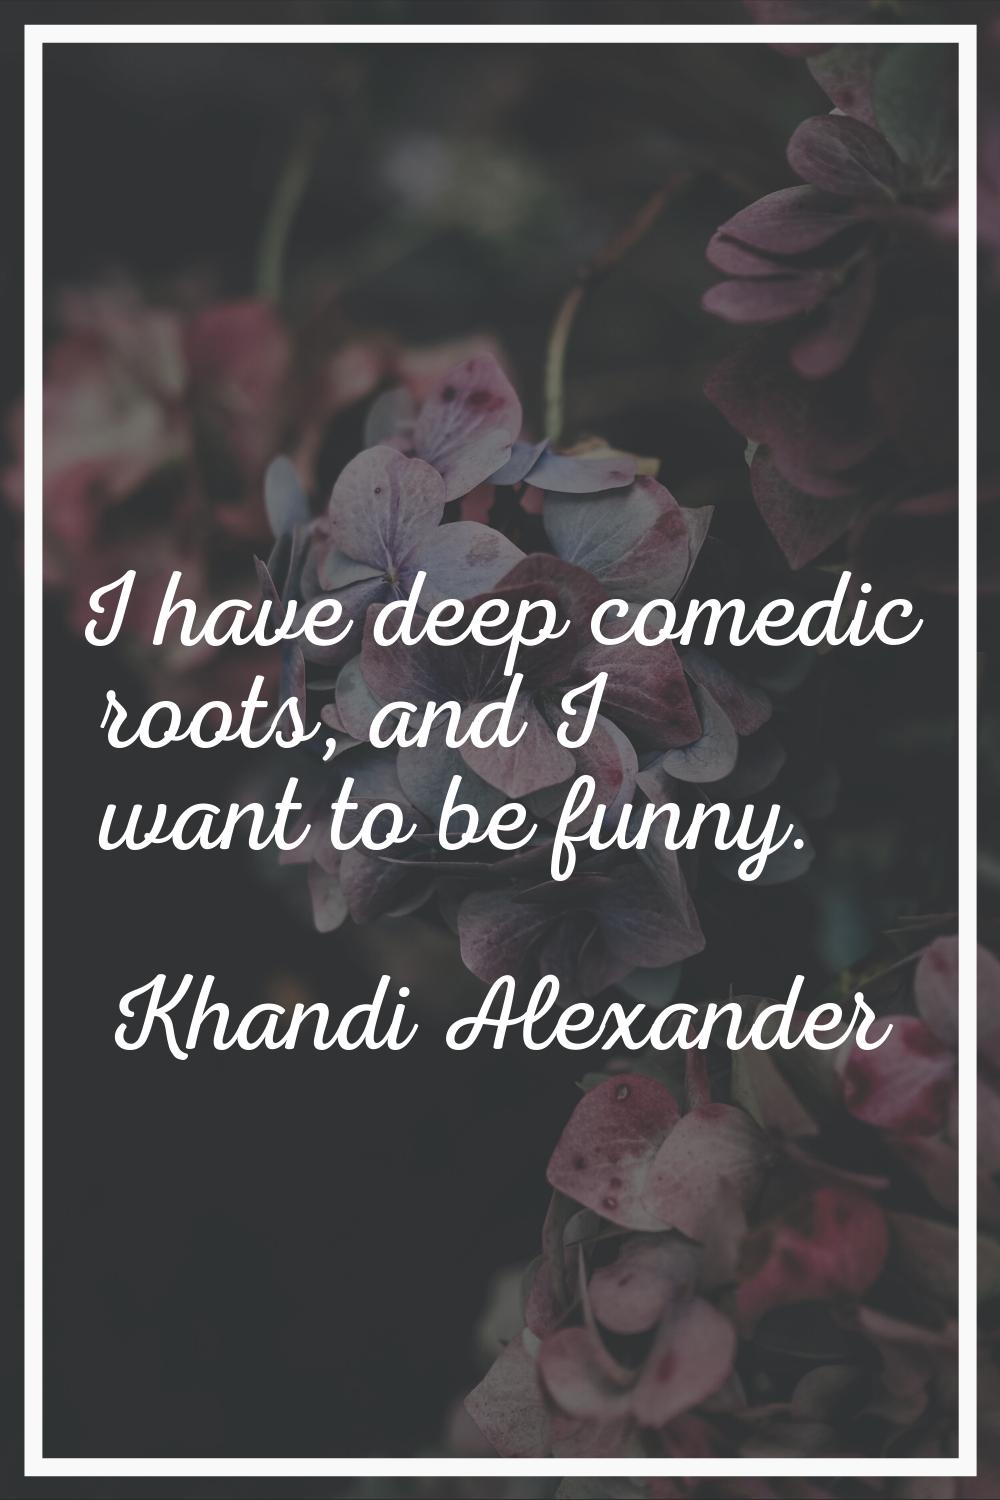 I have deep comedic roots, and I want to be funny.